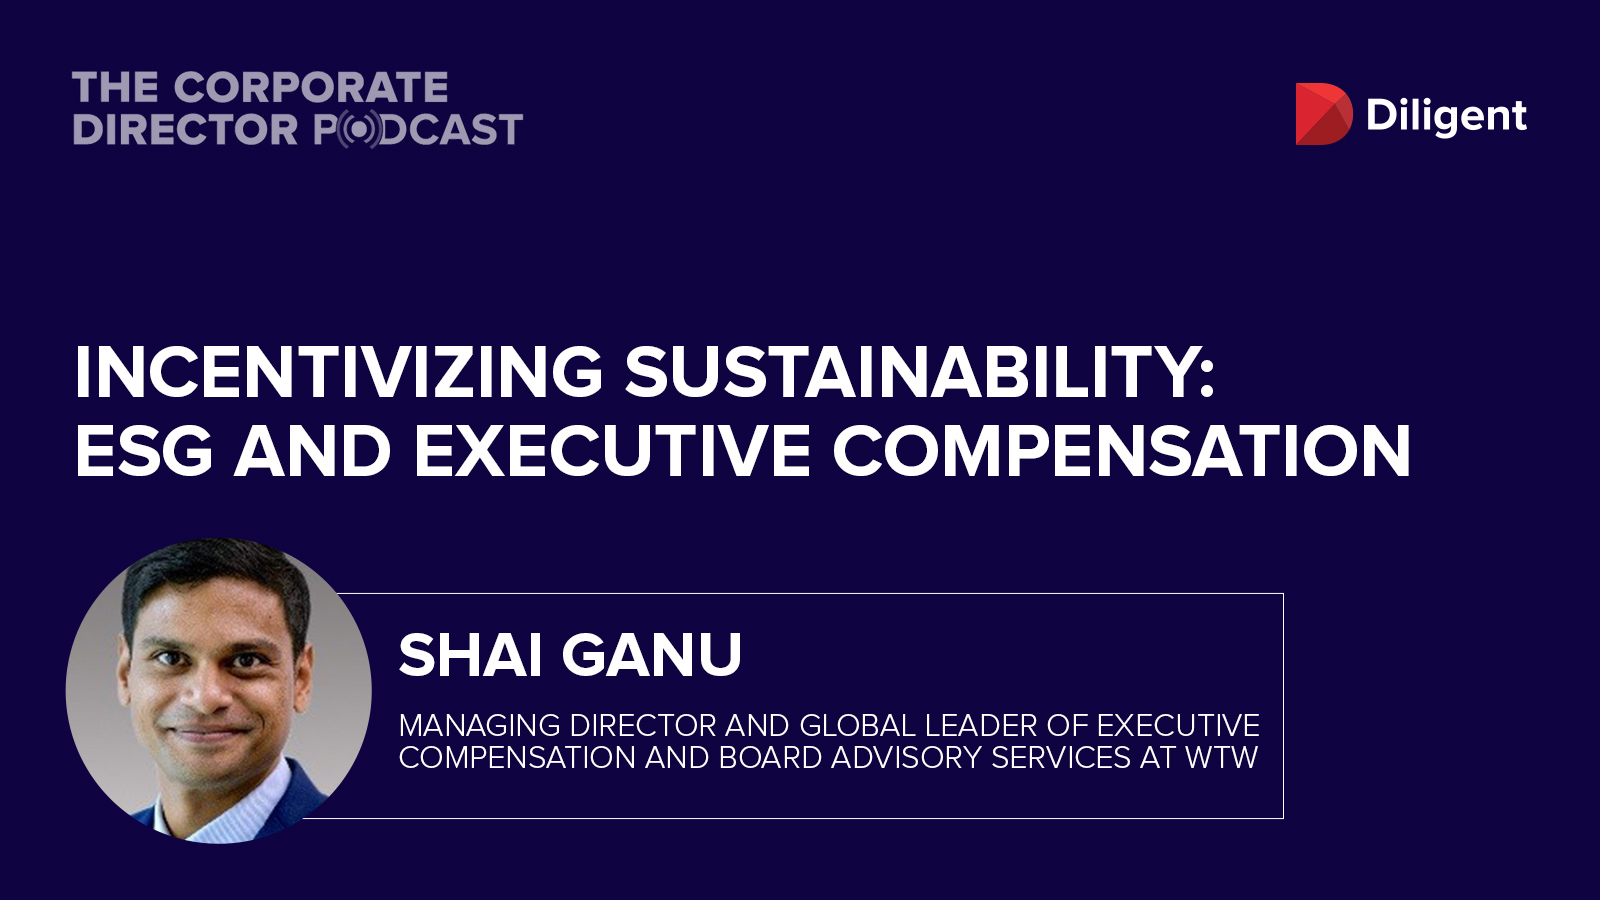 Diligent Corporate Director Podcast Incentivizing Sustainability ESG and Executive Compensation